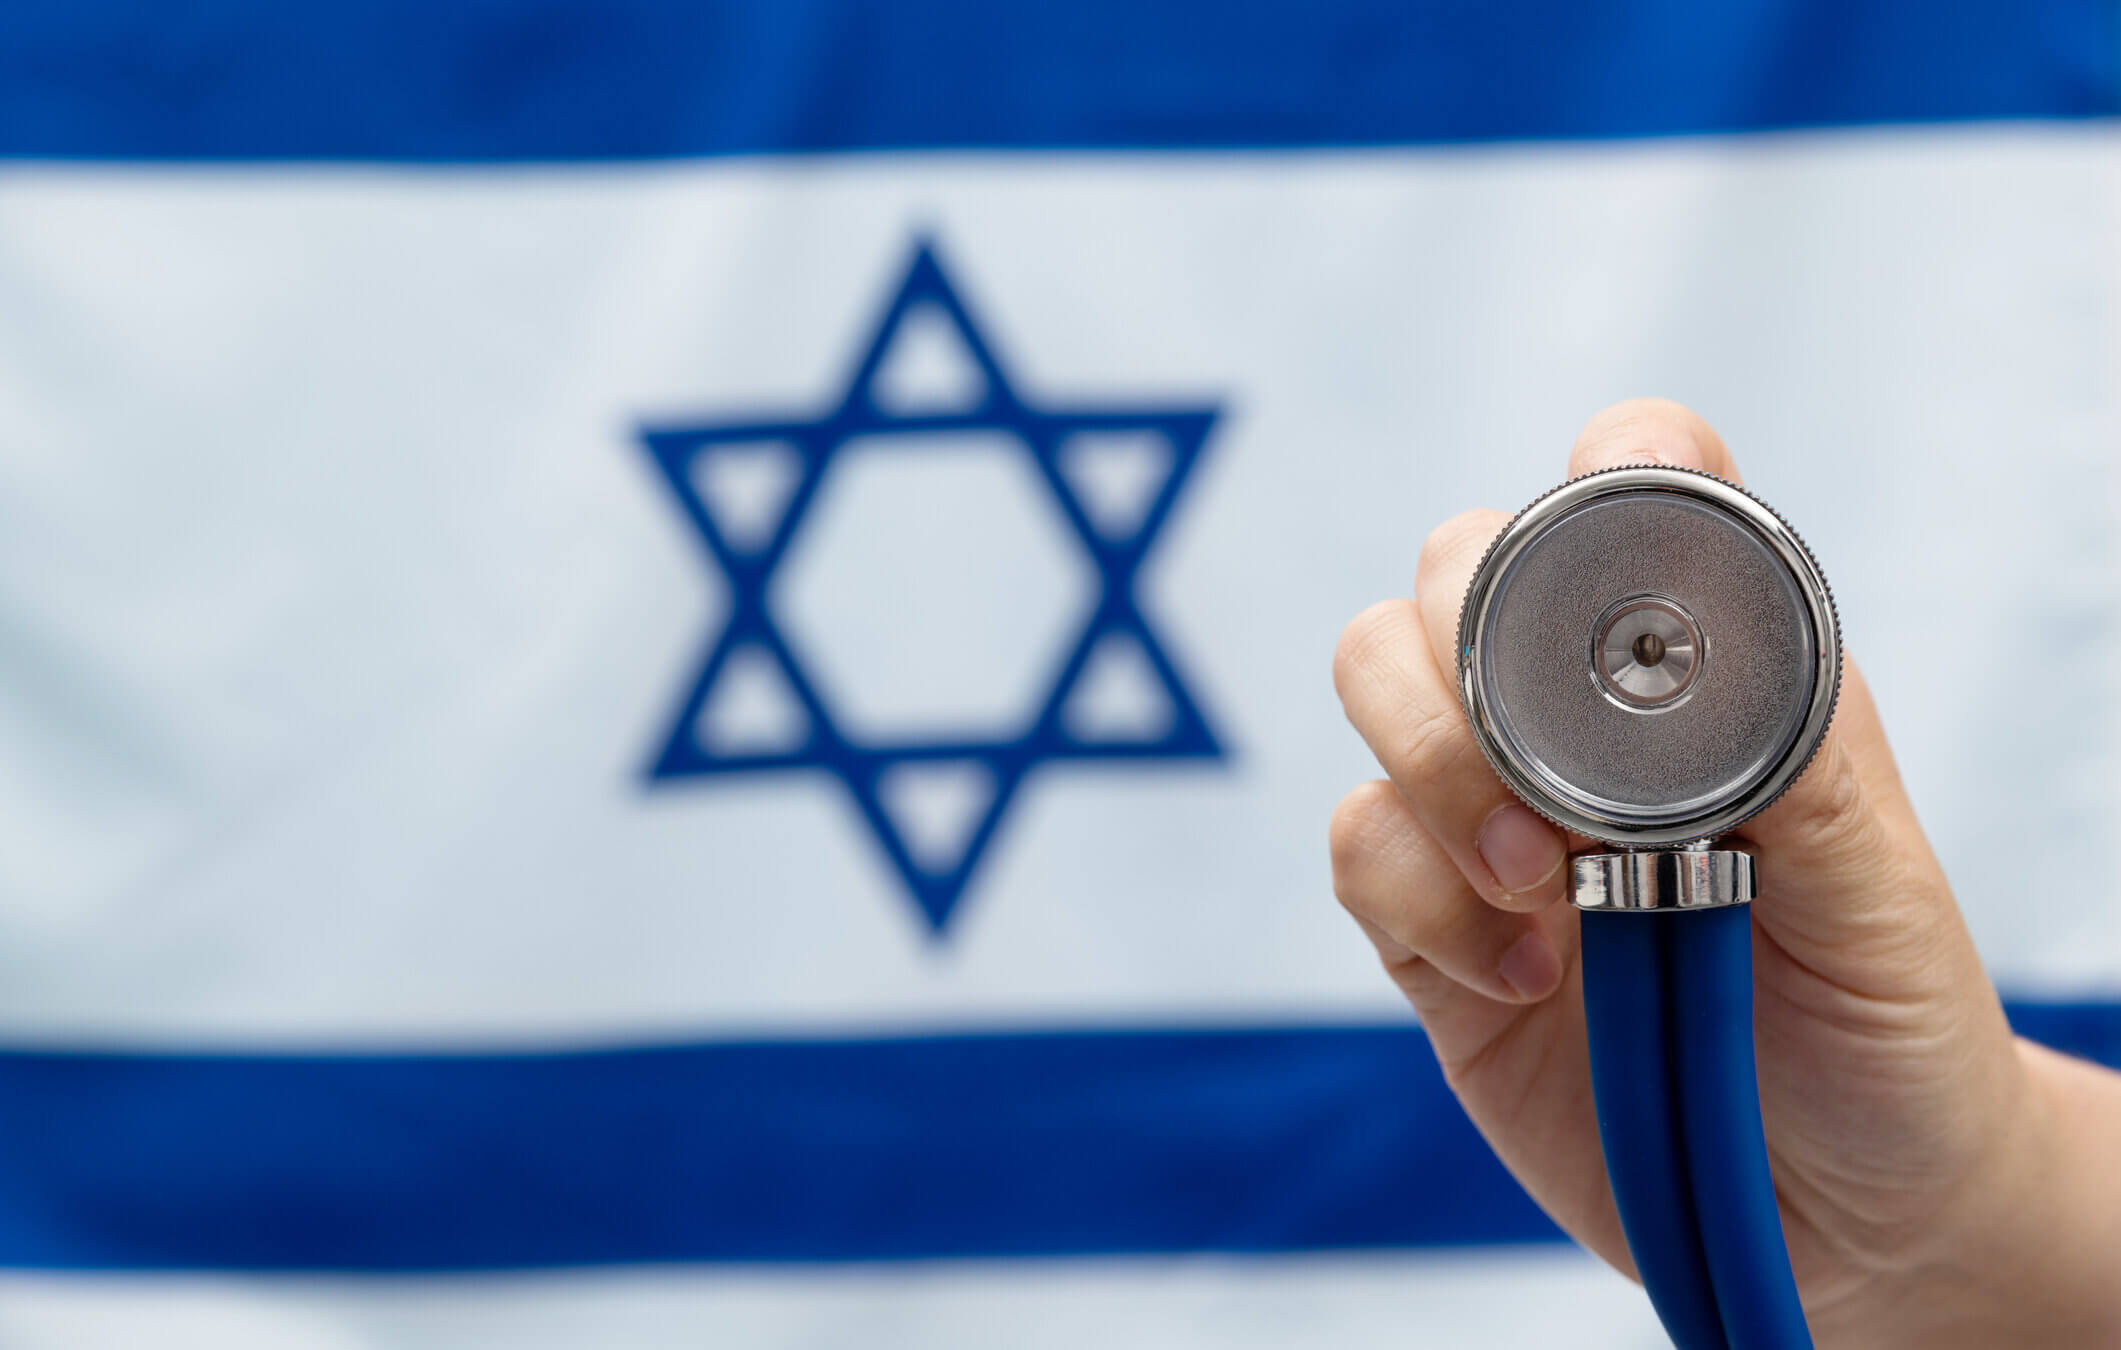 How do you know if your doctor is Zionist?